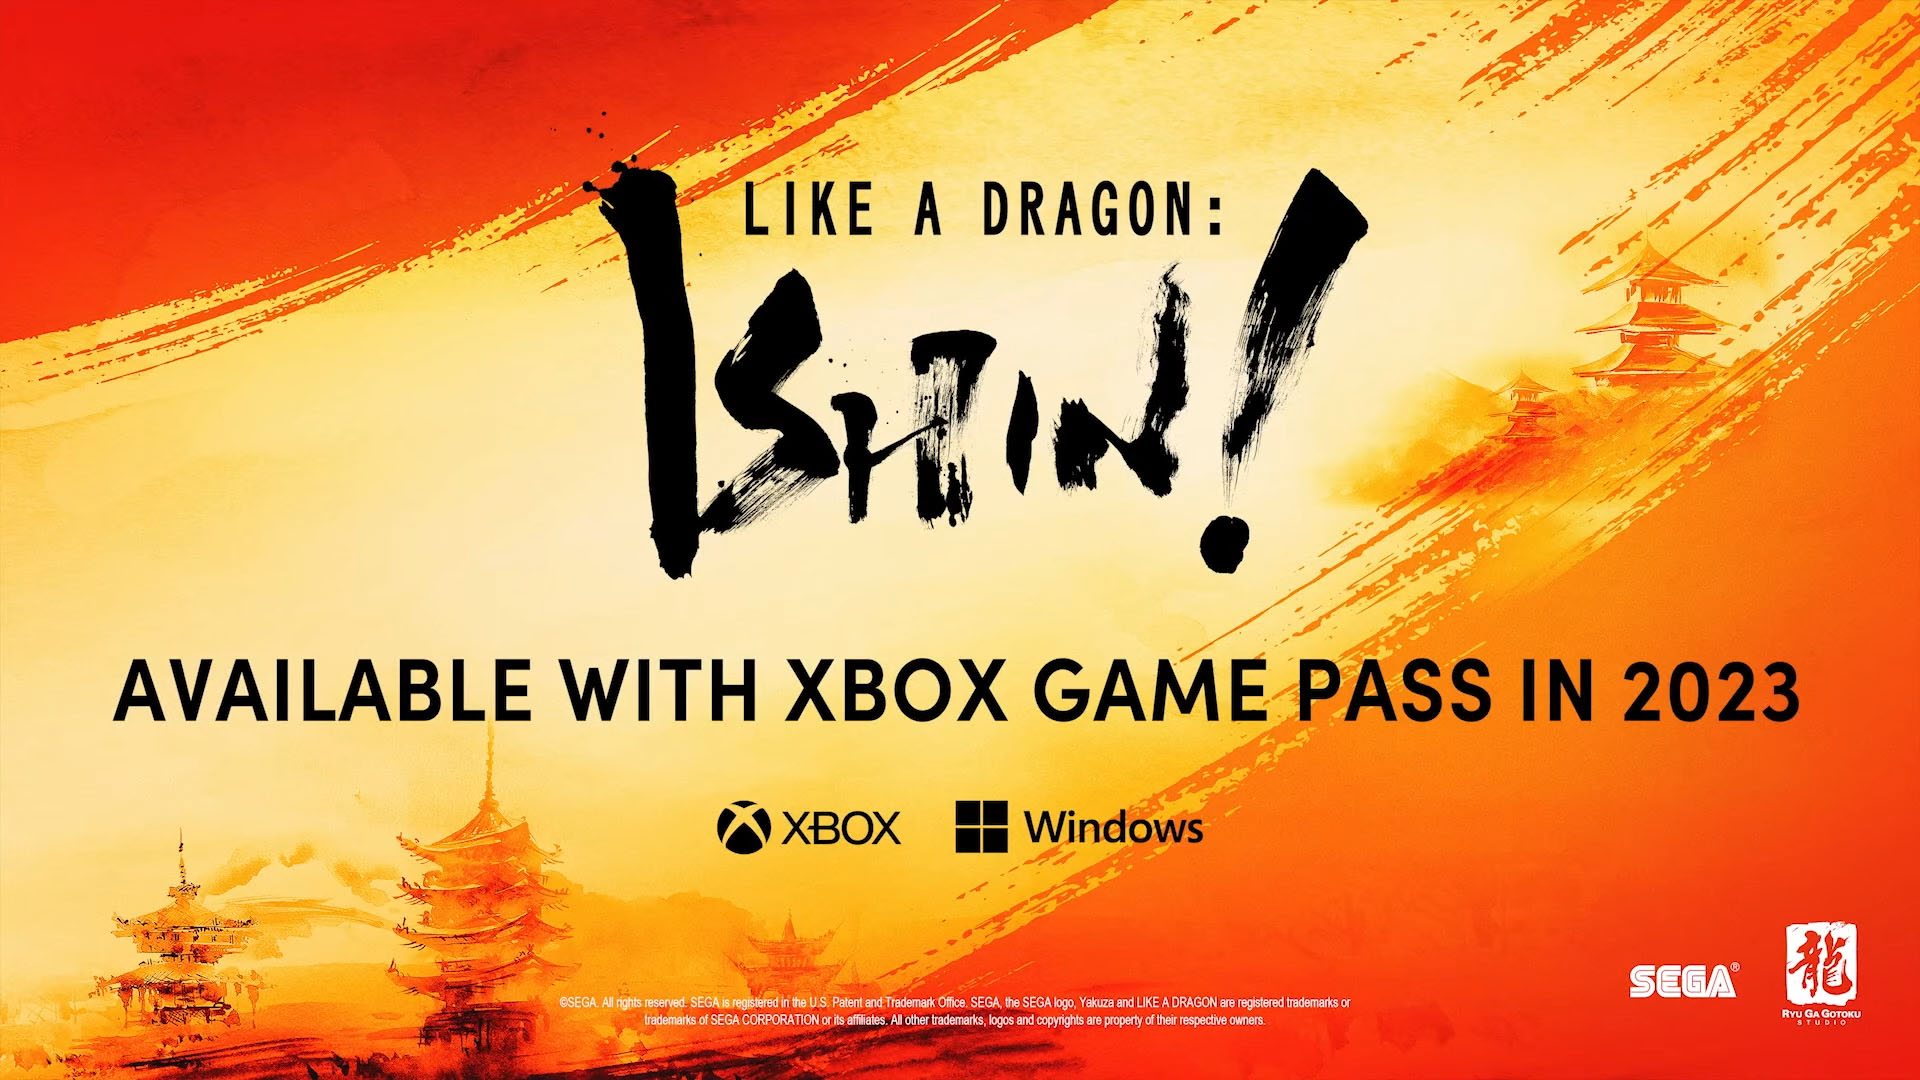 Like a Dragon Gaiden and Wild Hearts lead Xbox Game Pass for November 2023